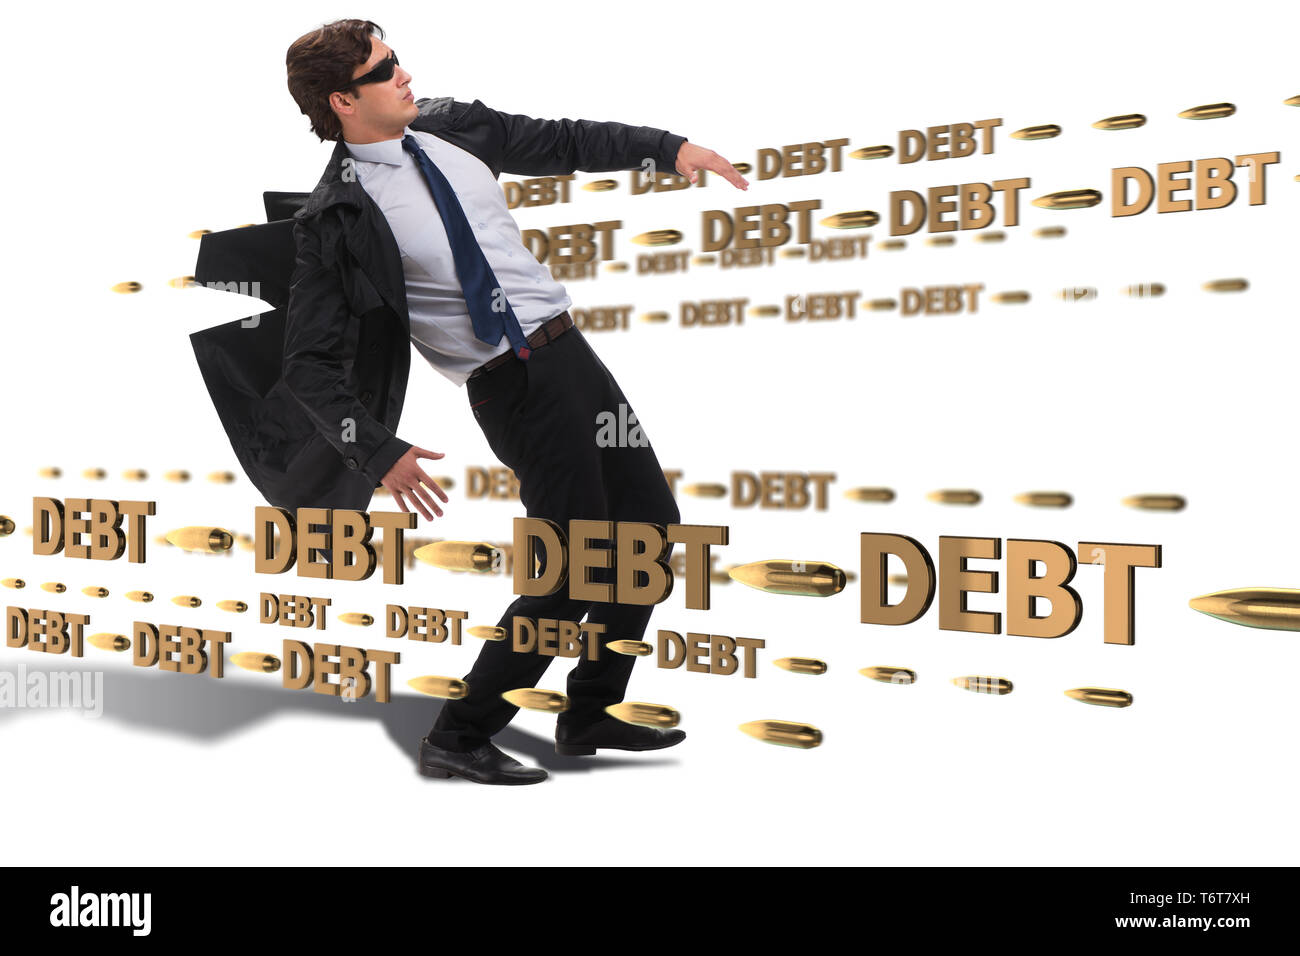 Business concept of debt and borrowing Stock Photo